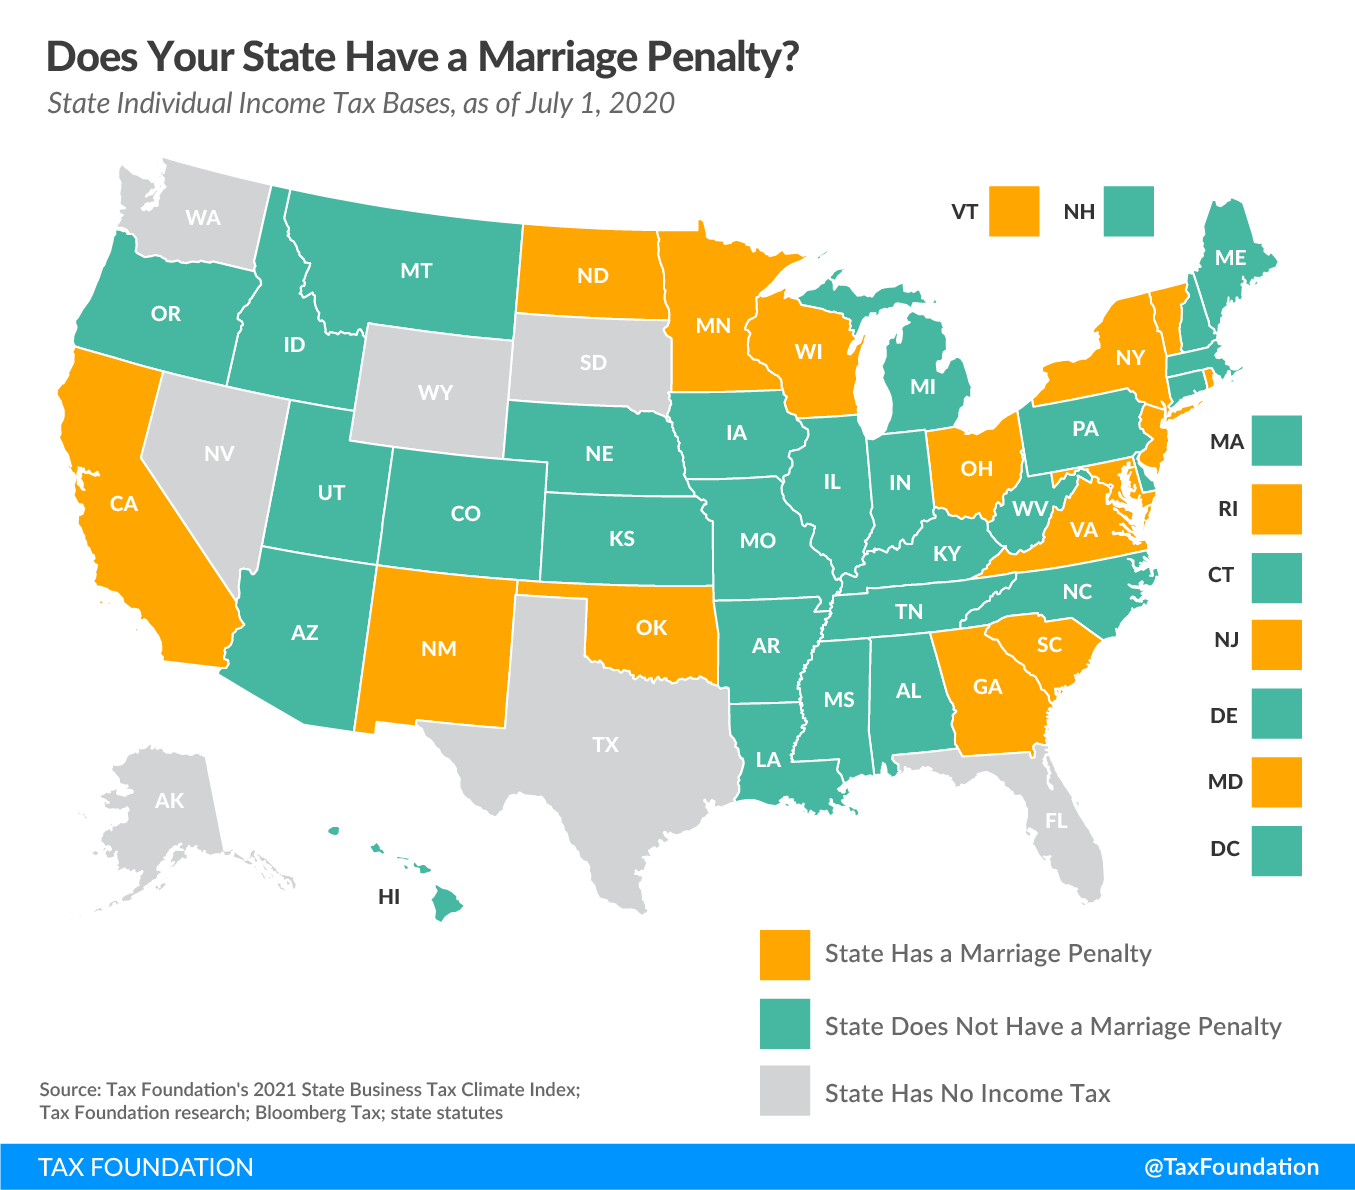 State marriage penalty, state marriage penalties, does your state have a marriage penalty?